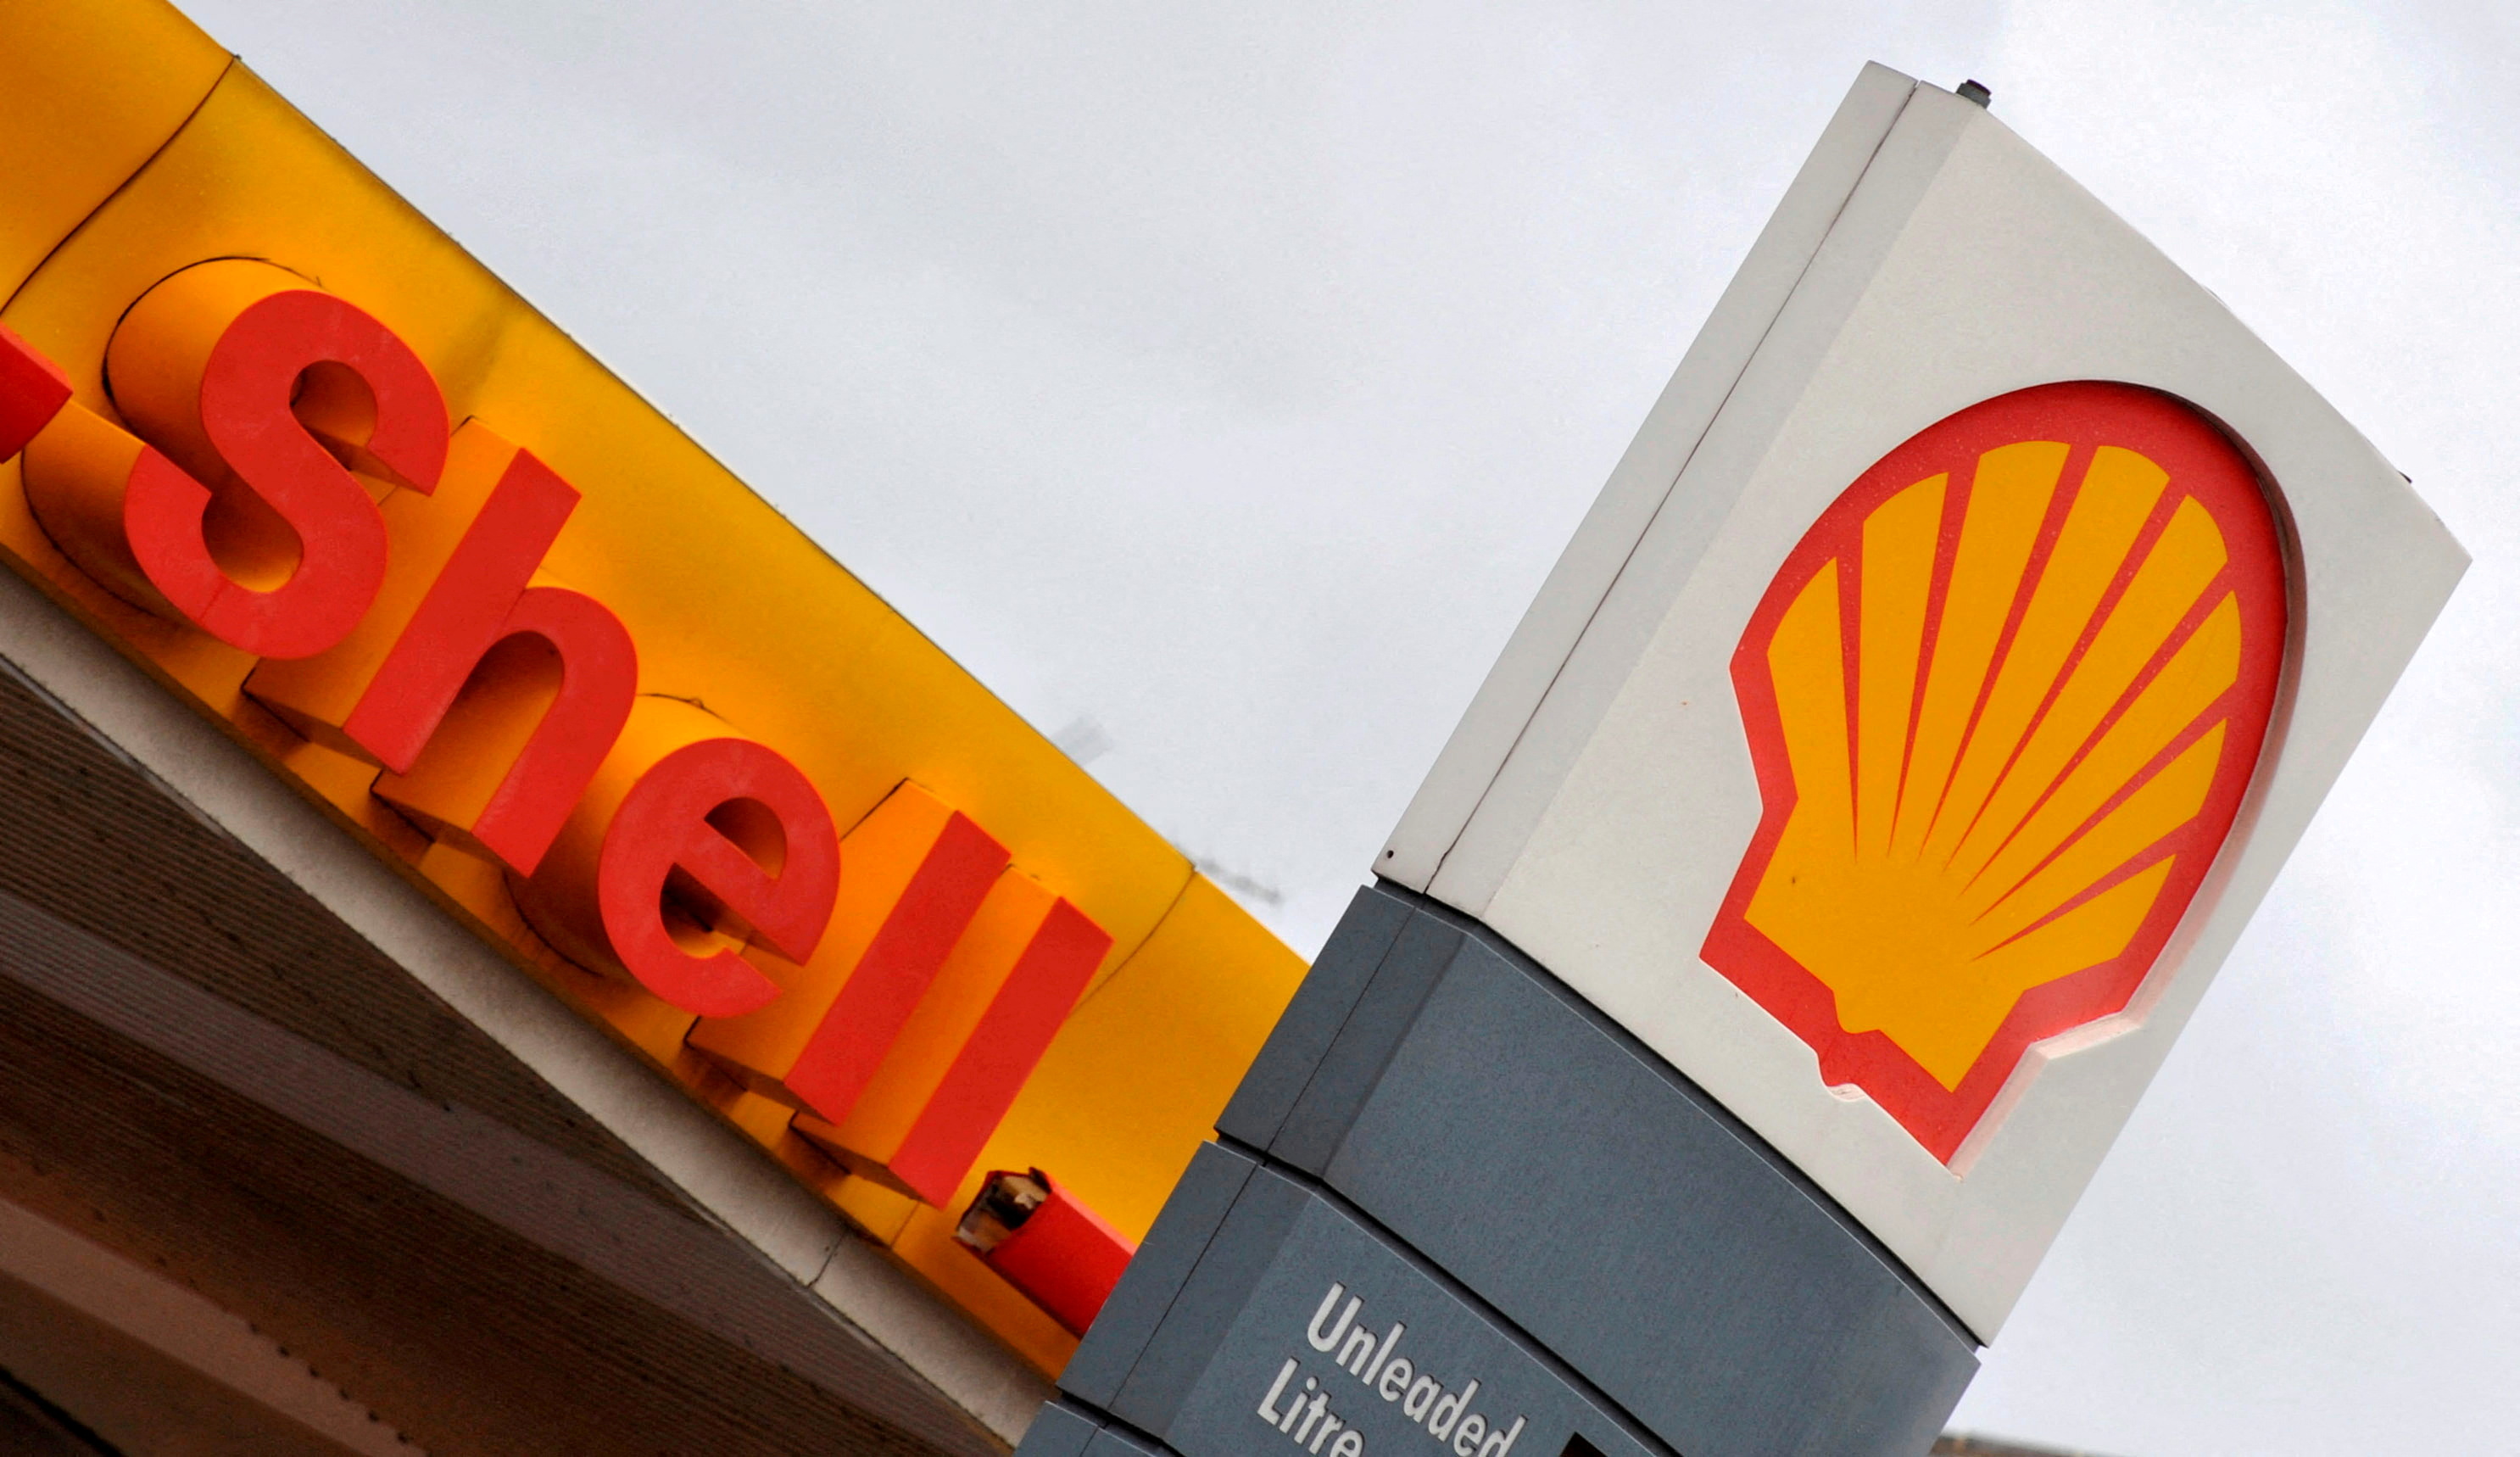 The Royal Dutch Shell logo is seen at a Shell petrol station in London, January 31, 2008. REUTERS/Toby Melville